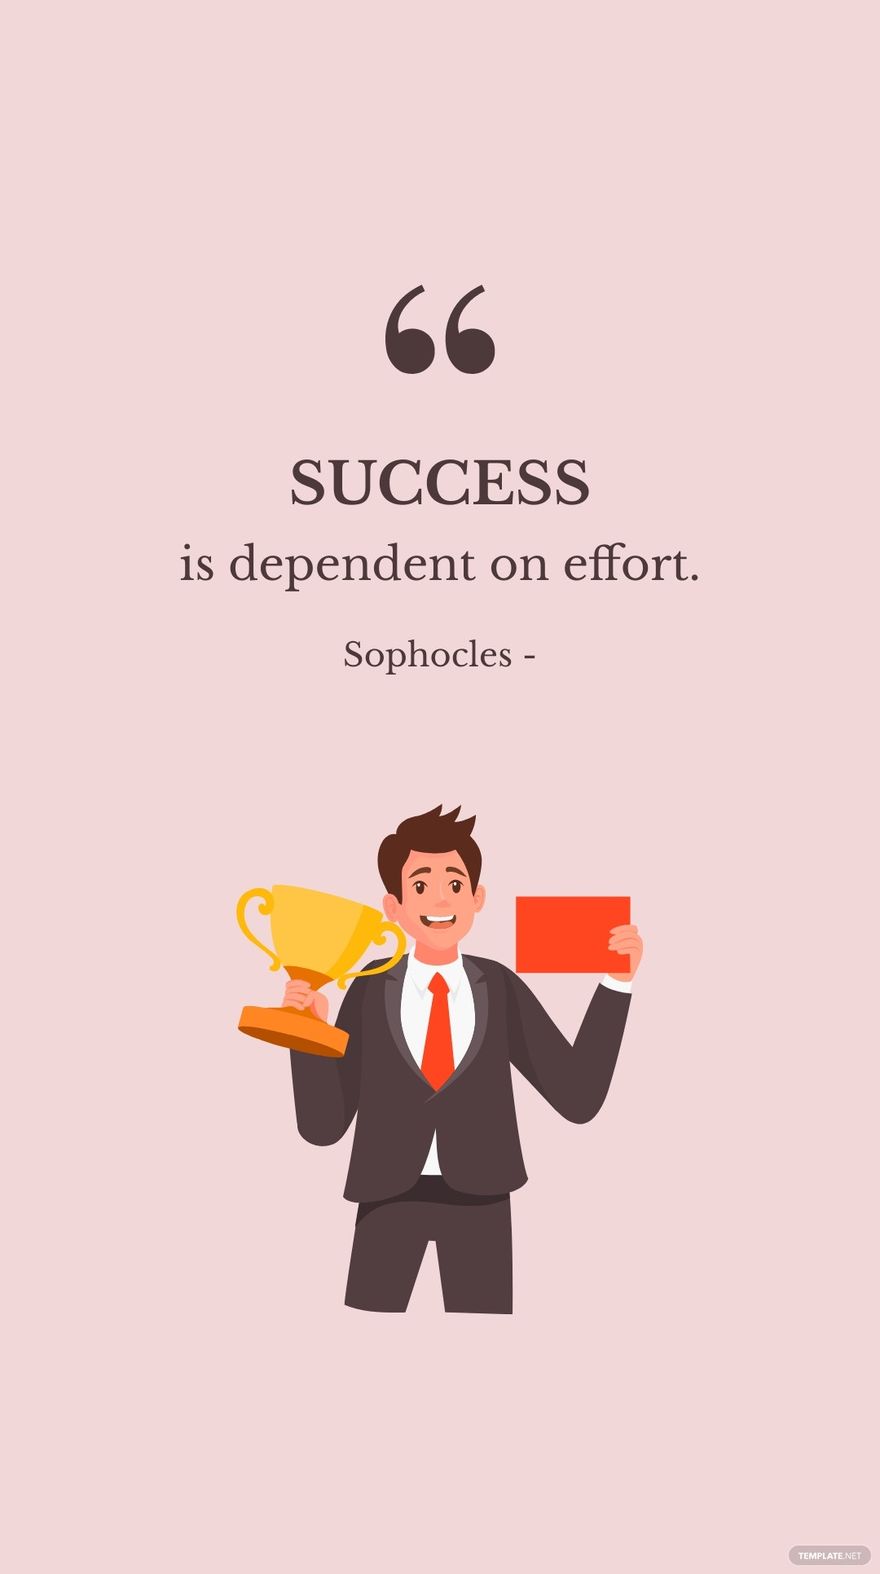 Sophocles - Success is dependent on effort.